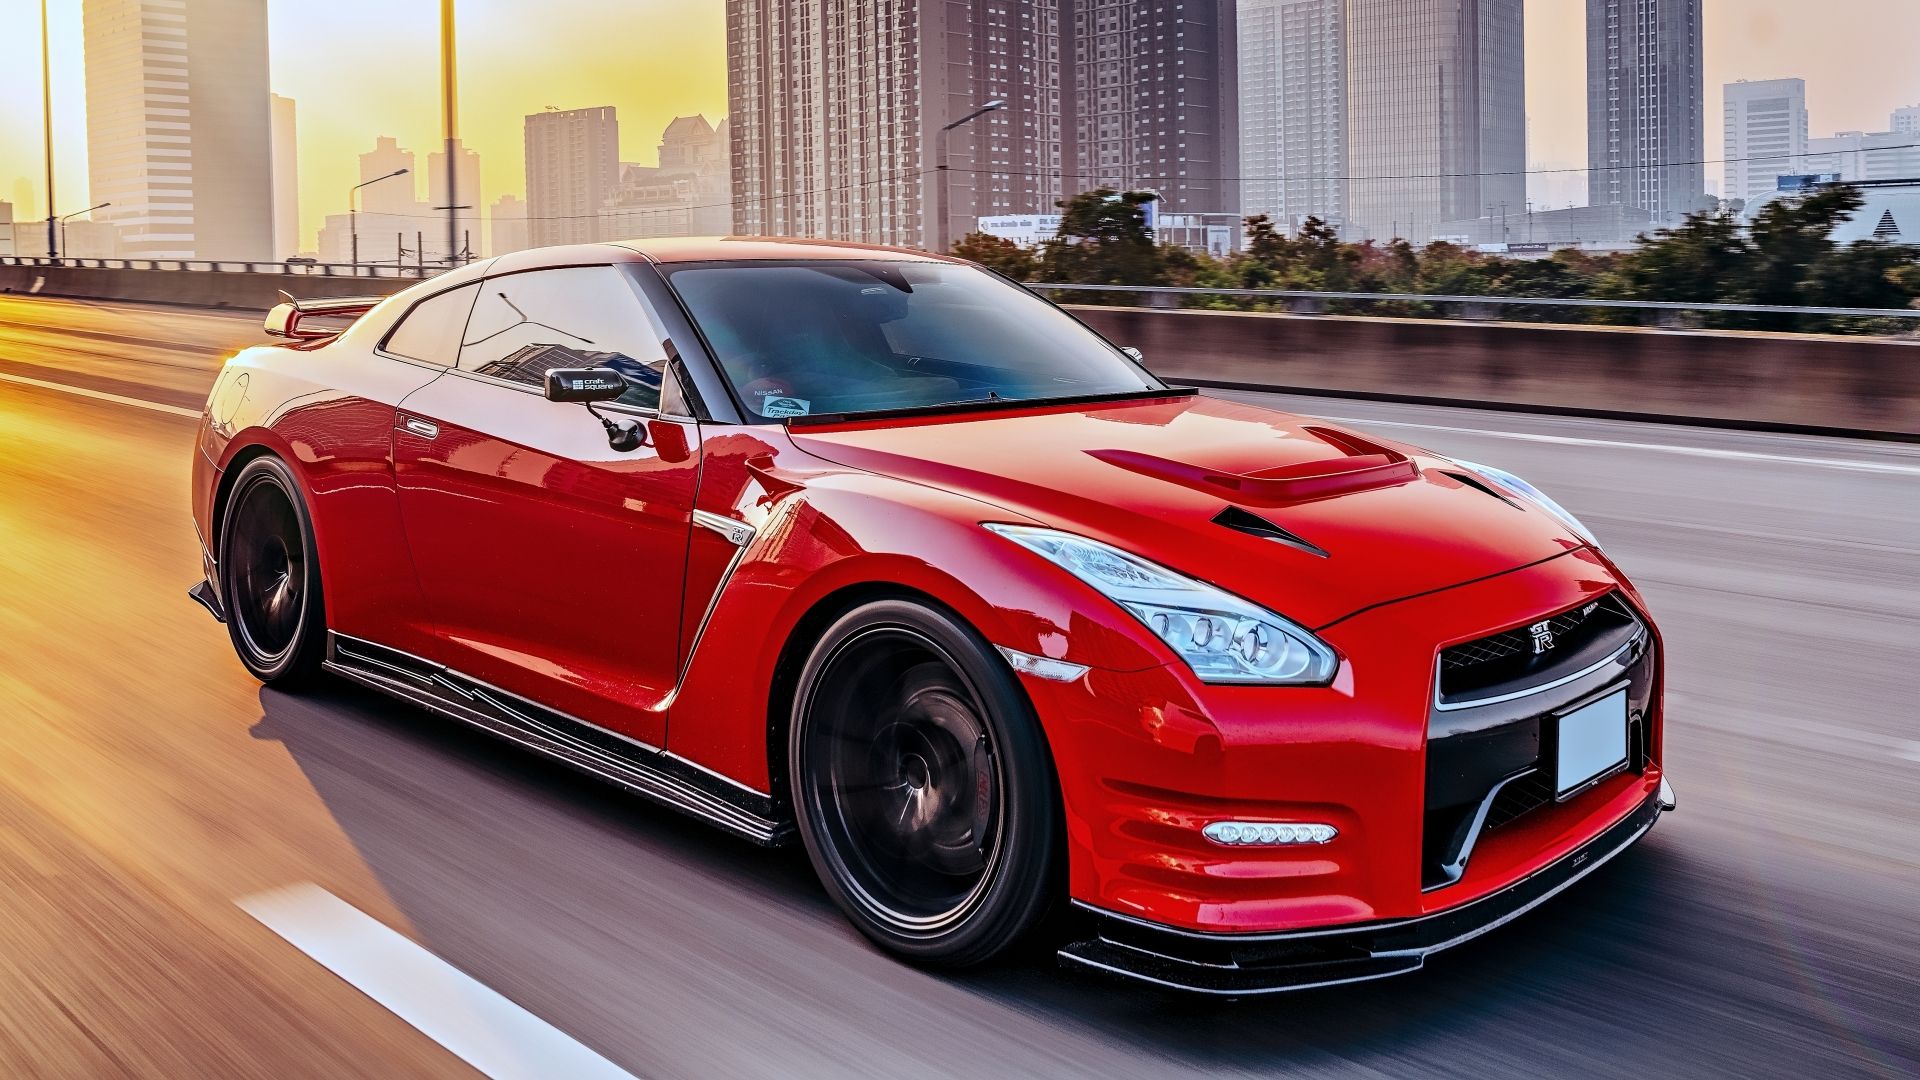 Nissan R36 GT-R: Godzilla could evolve into electric family car